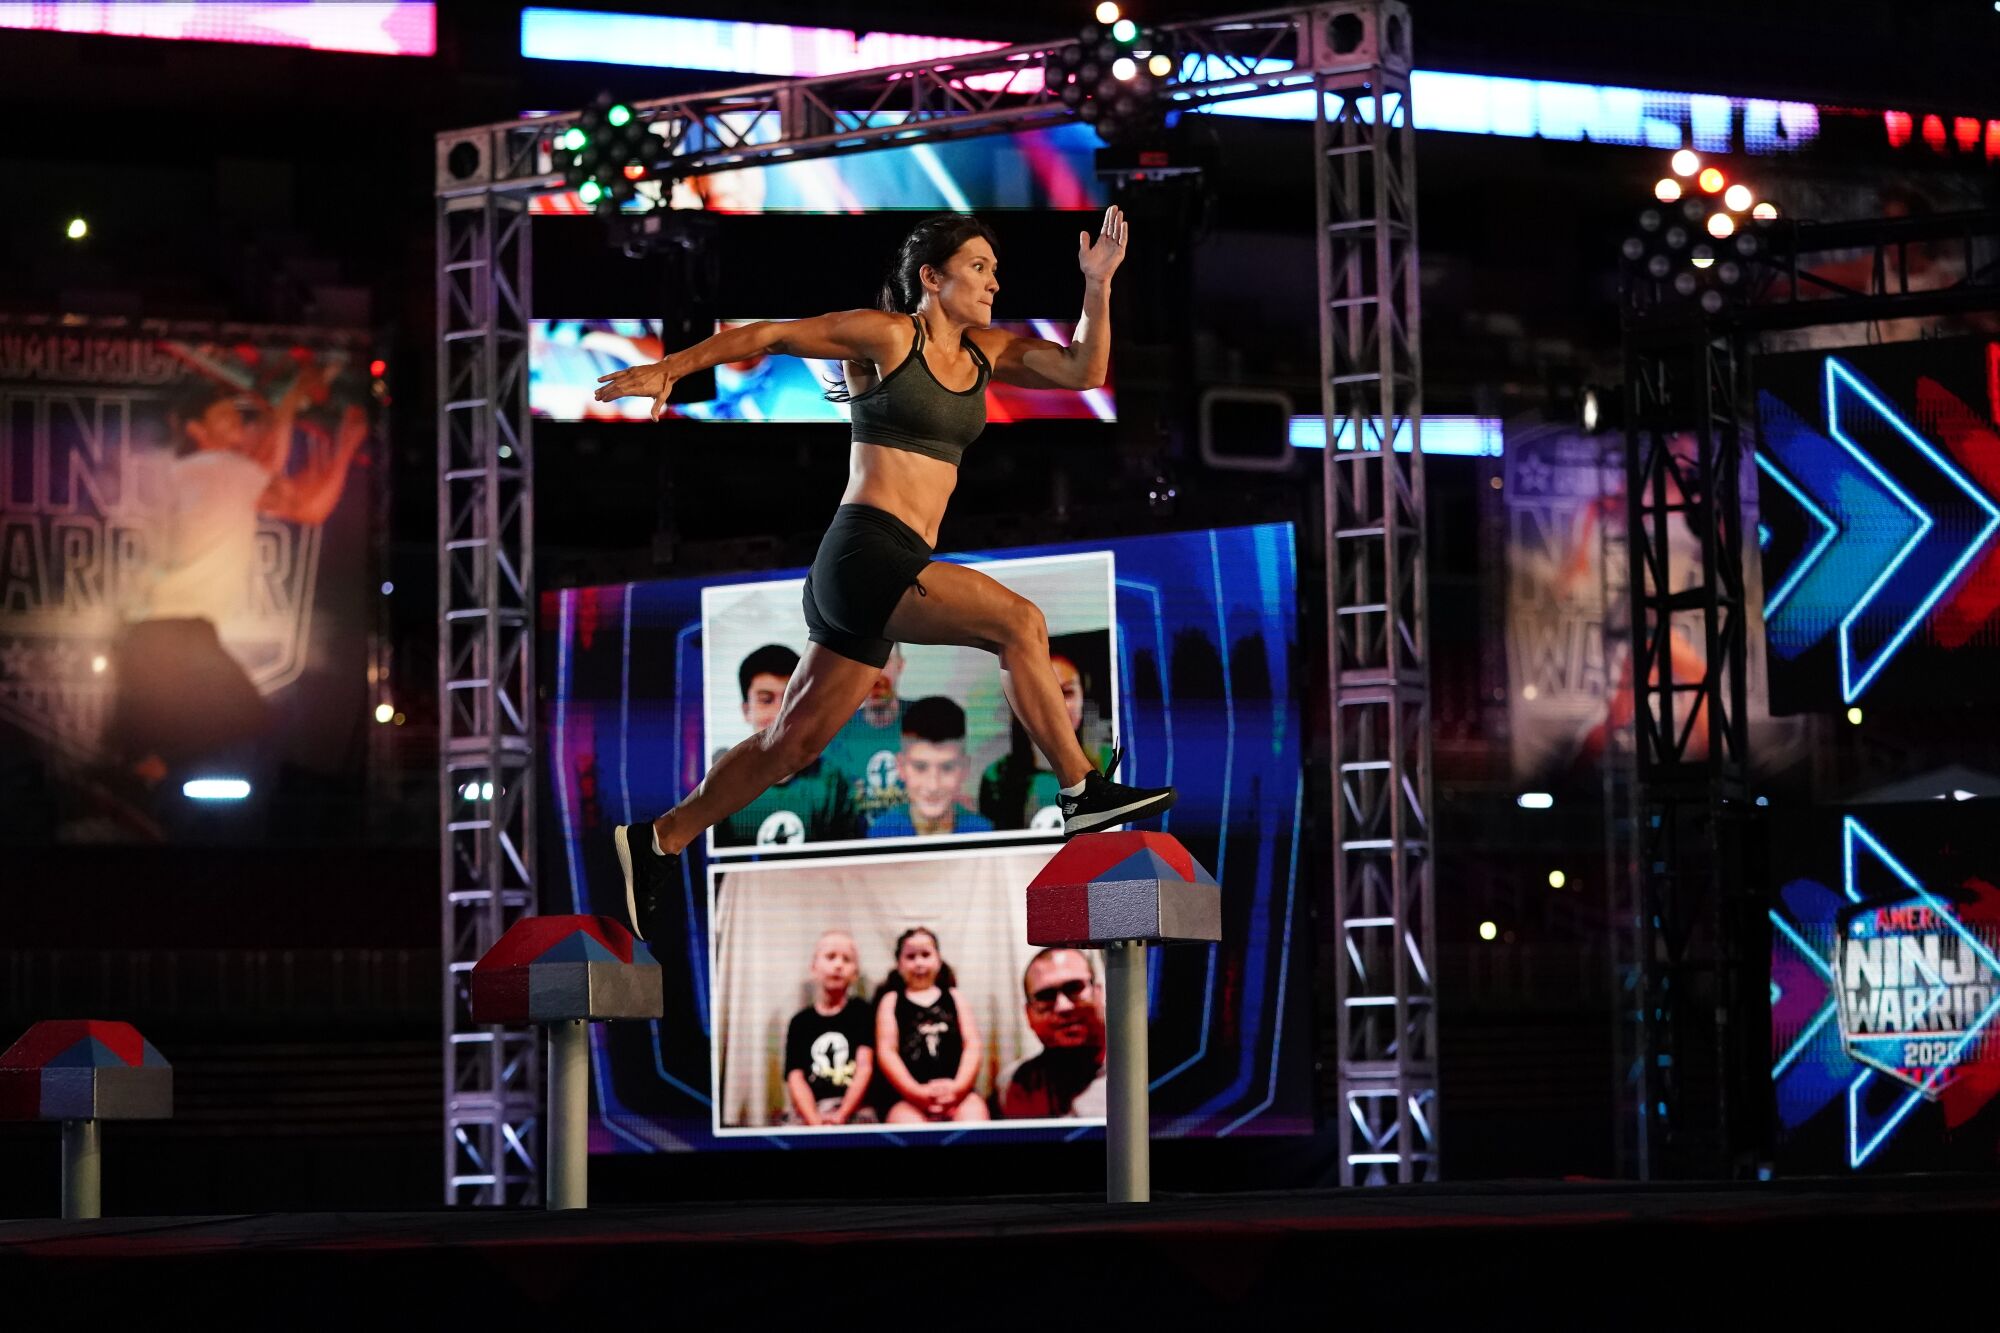 Sandy Zimmerman competes in the new season of "American Ninja Warrior," filmed amid the COVID-19 pandemic.